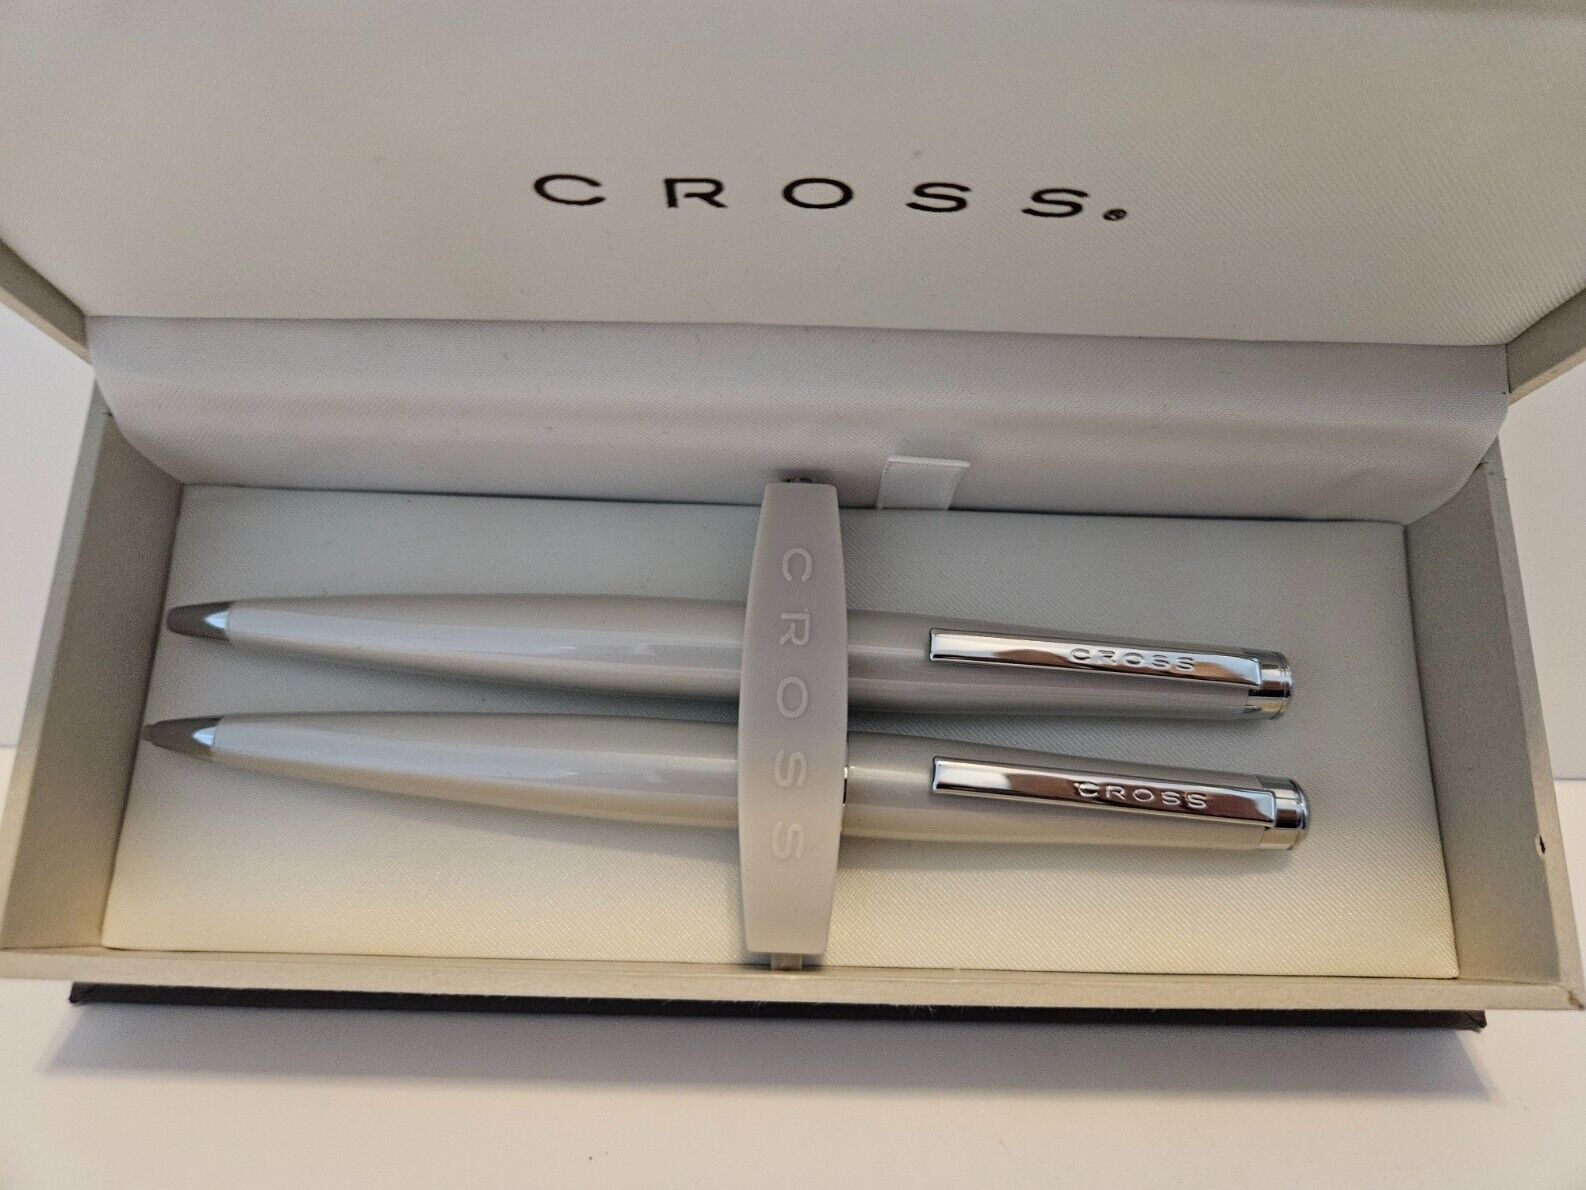 CROSS PEARLESCENT WHITE PEN & PENCIL SET LIMITED PRODUCTION DISCONTINED AT0191-4